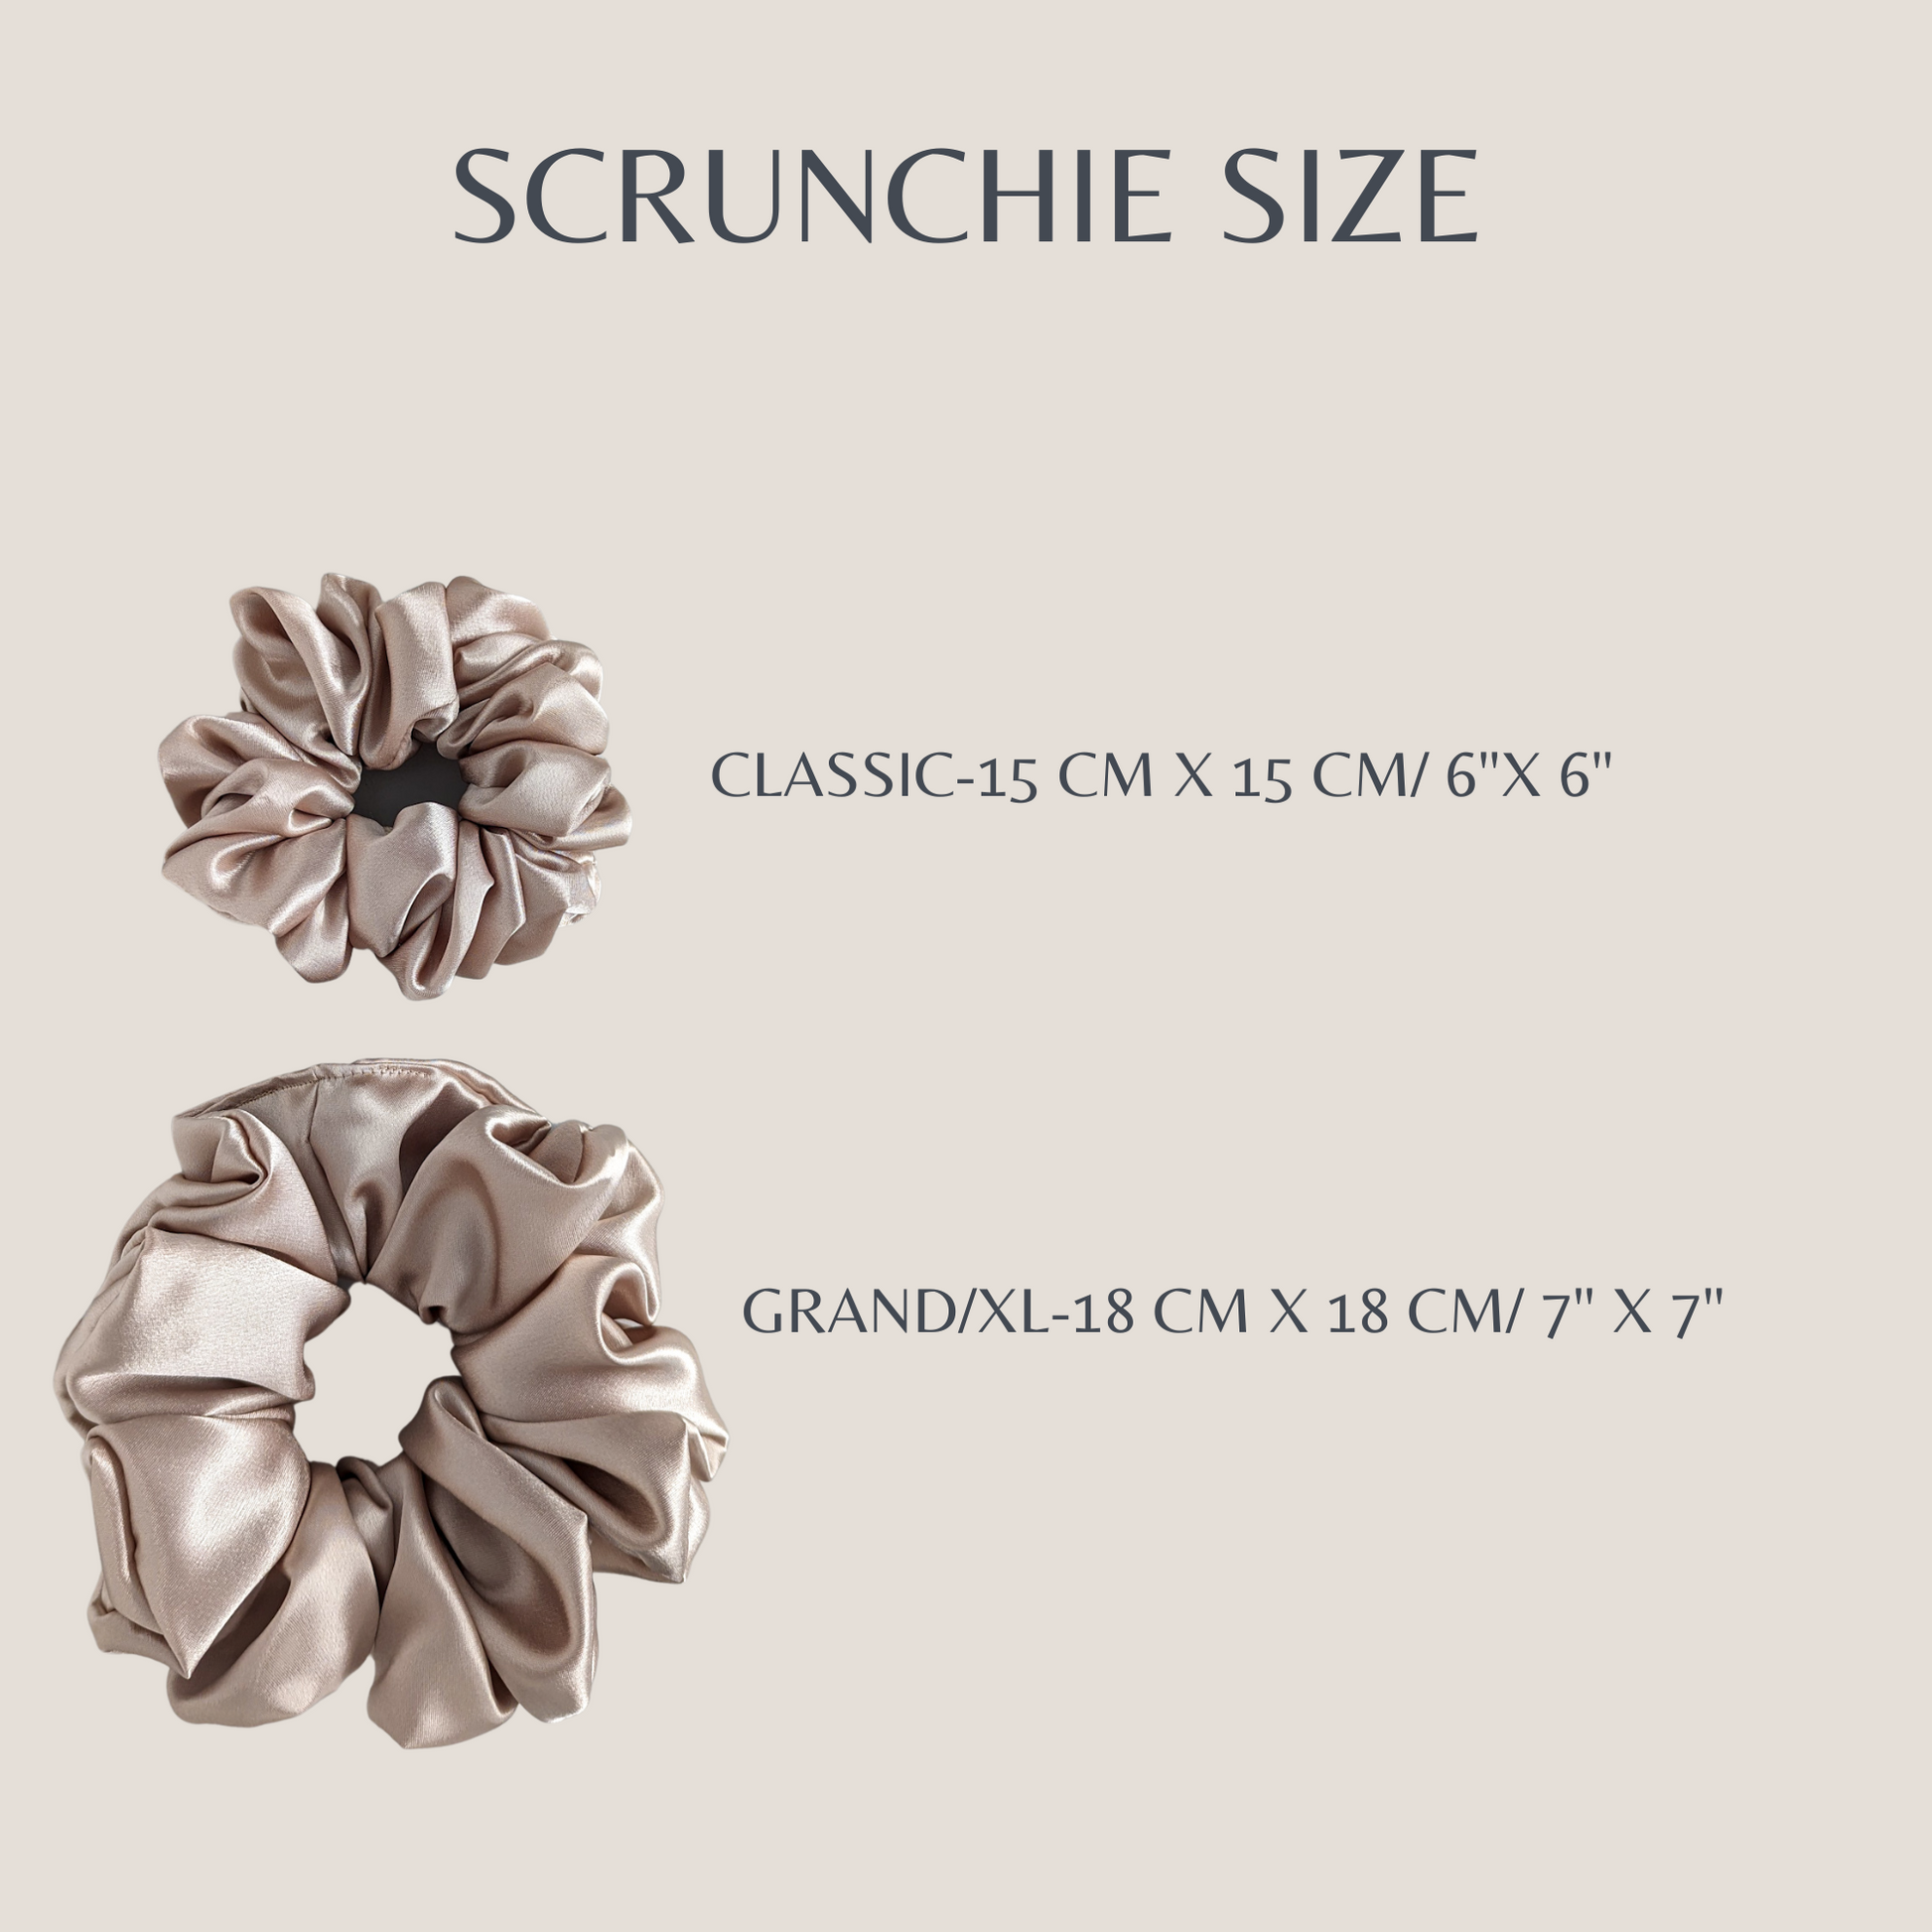 personalized satin scrunchies for bridesmaids available in 2 sizes classic 15cm x 15 cnm and XXL 18 x 18cm